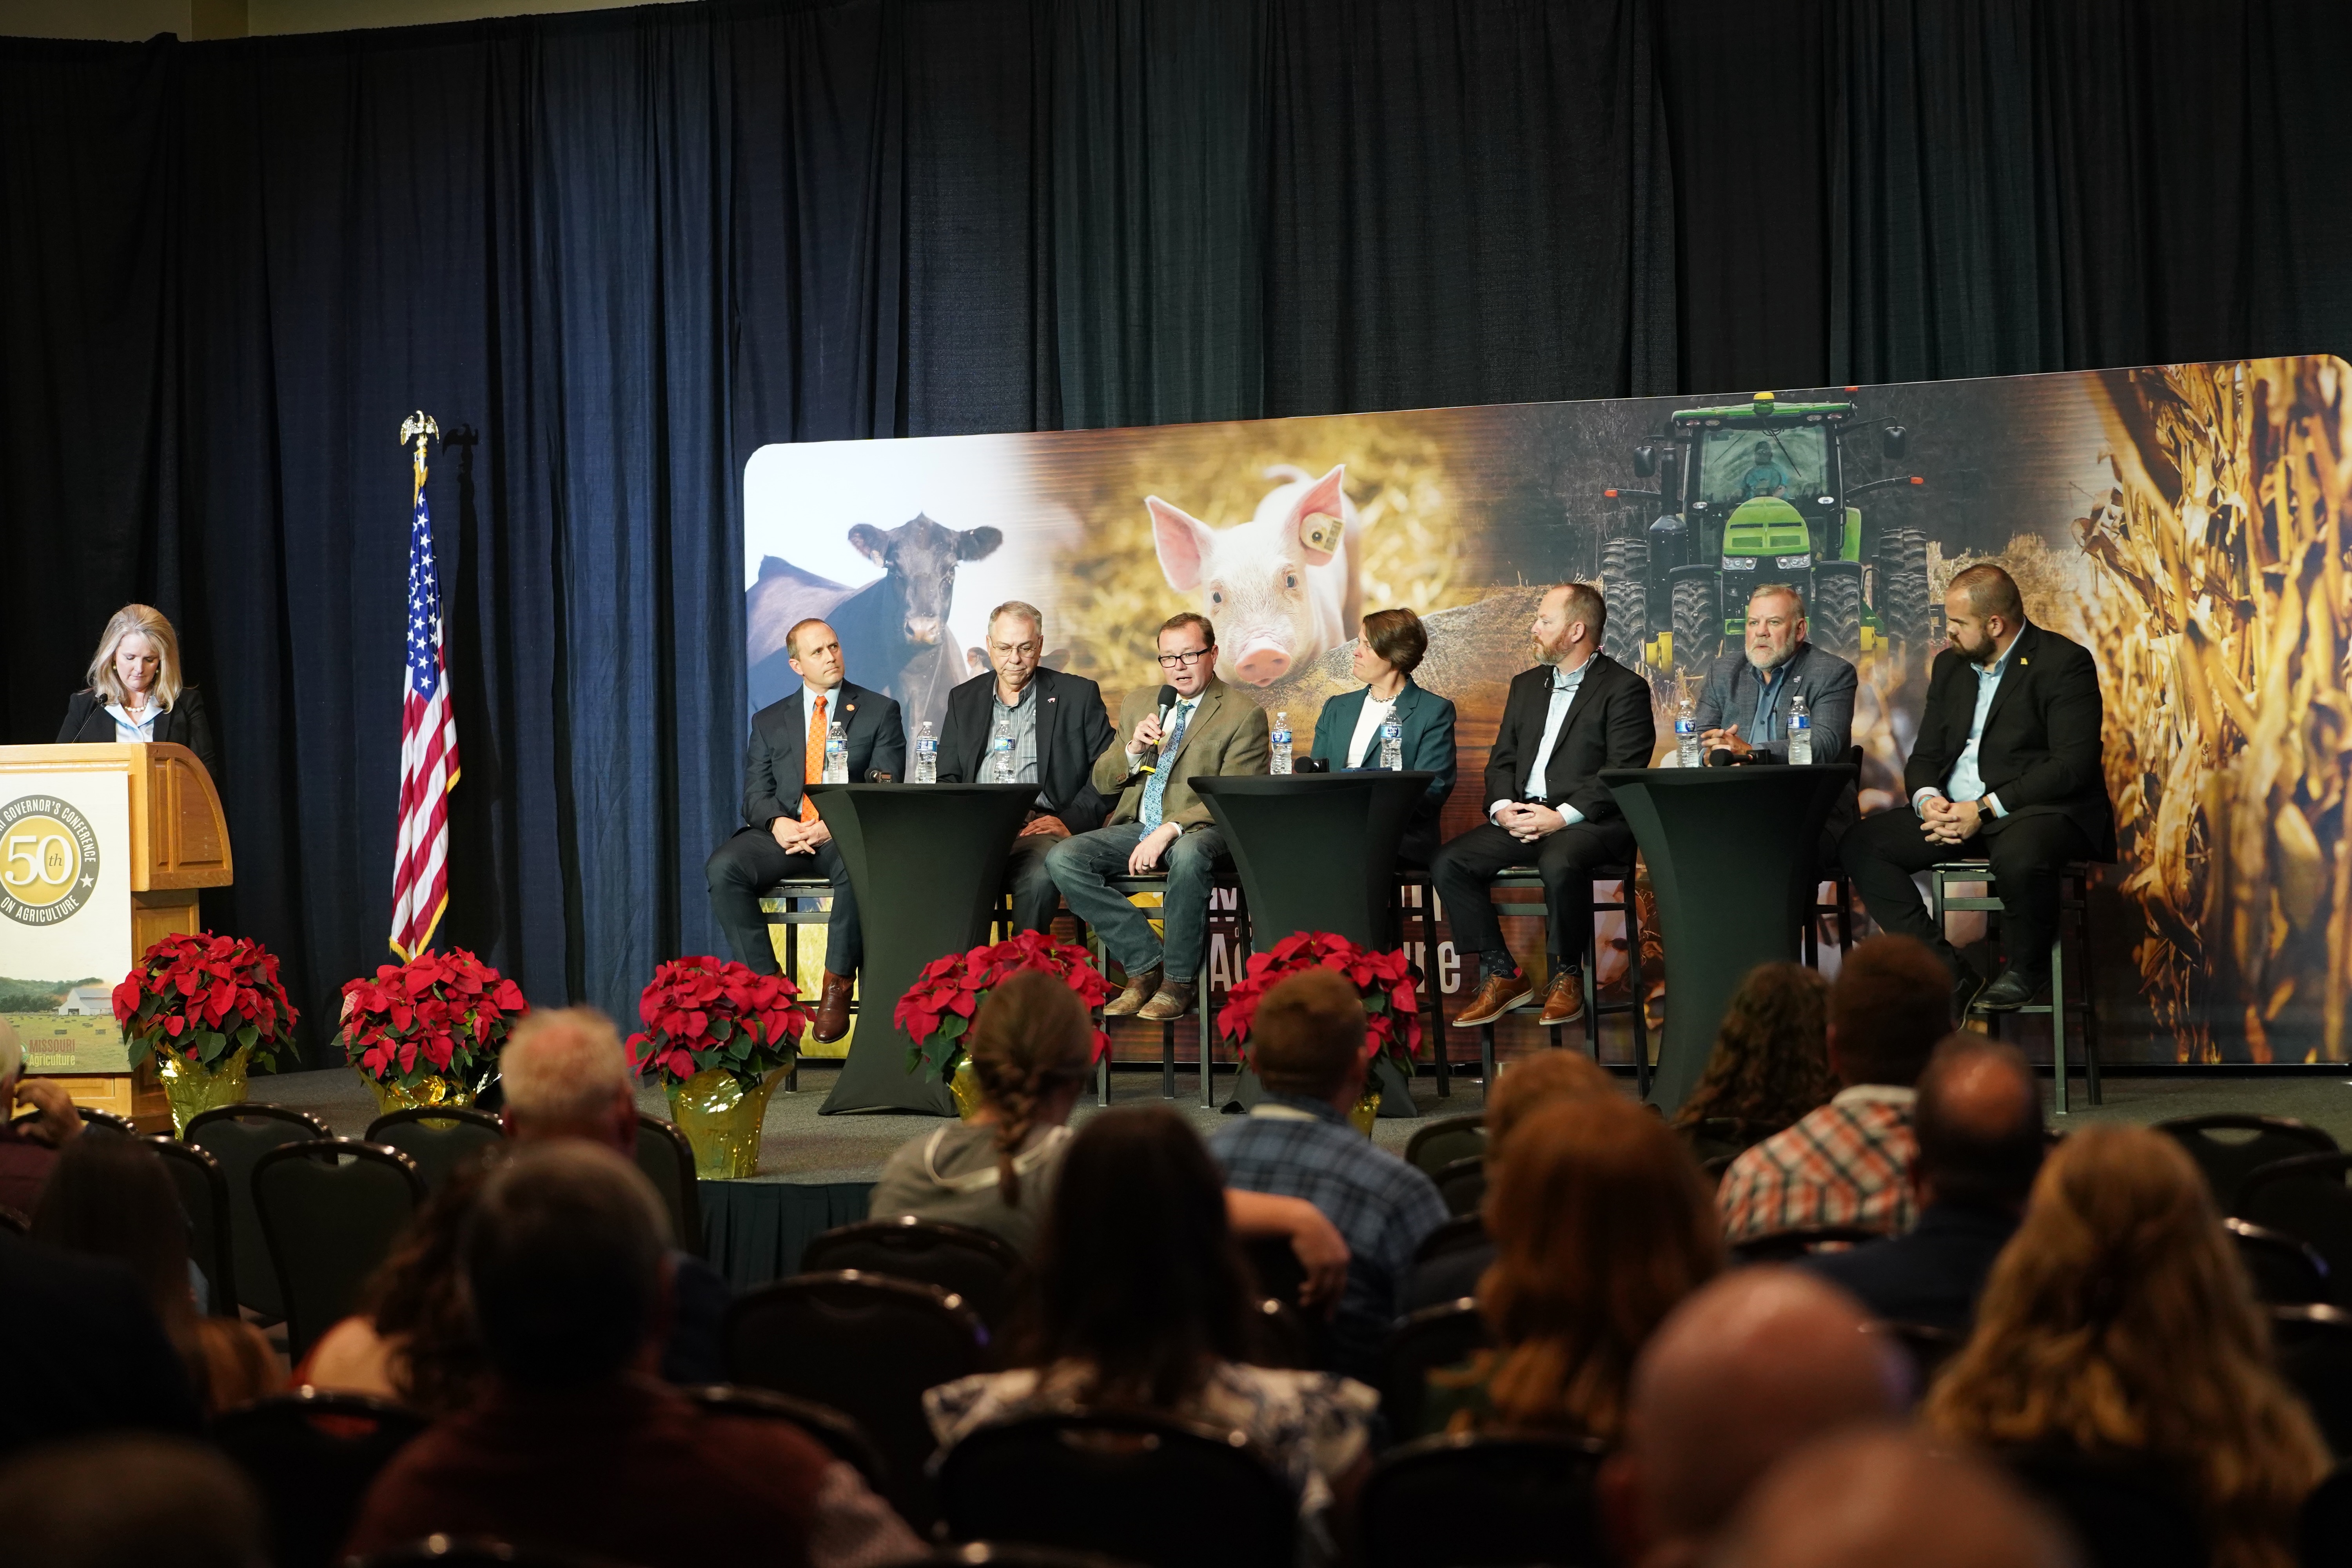 Agriculture Industry Panel leaders from the dairy, soybean, cattle, forestry, corn, and pork associations and the Missouri Farm Bureau discussed pressing ag issues at the conference.